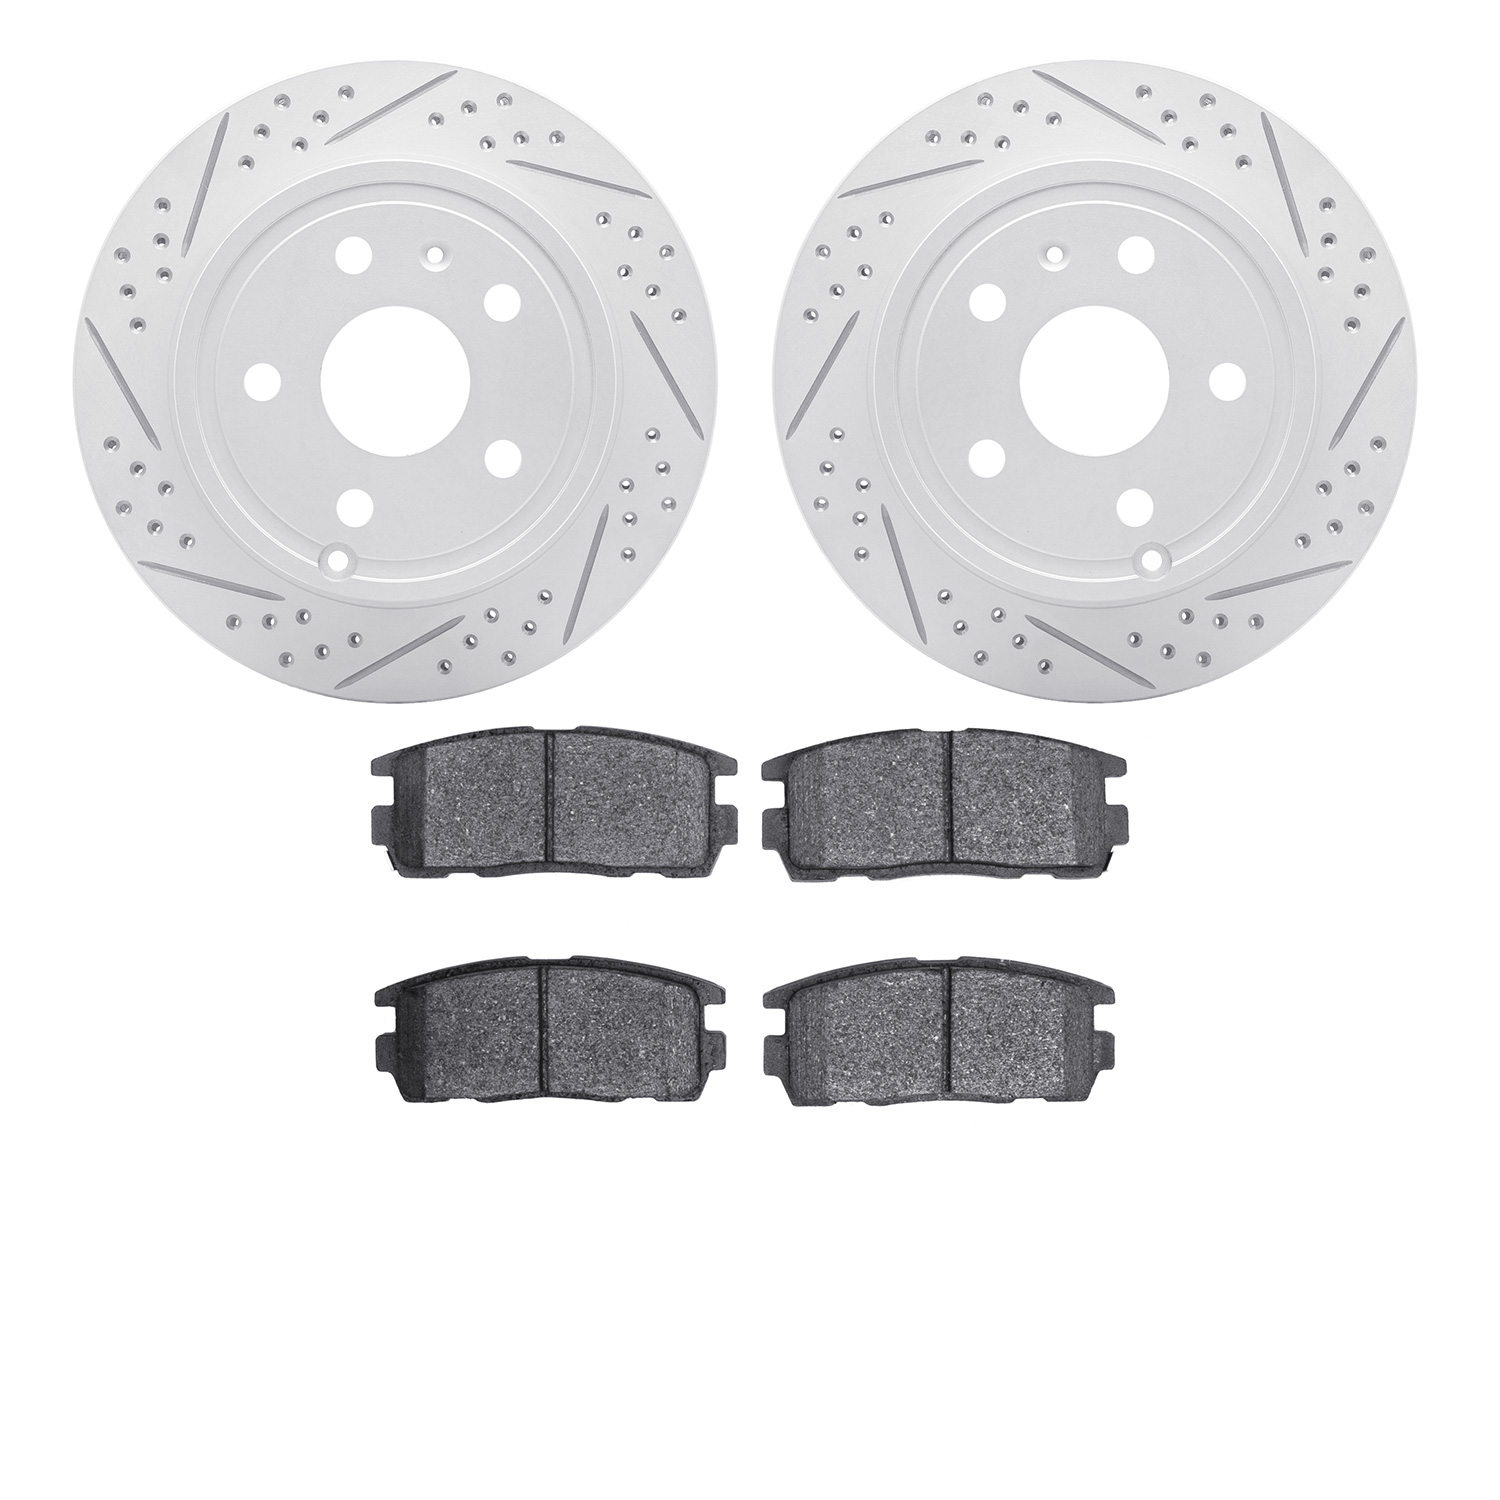 2502-48064 Geoperformance Drilled/Slotted Rotors w/5000 Advanced Brake Pads Kit, 2010-2017 GM, Position: Rear